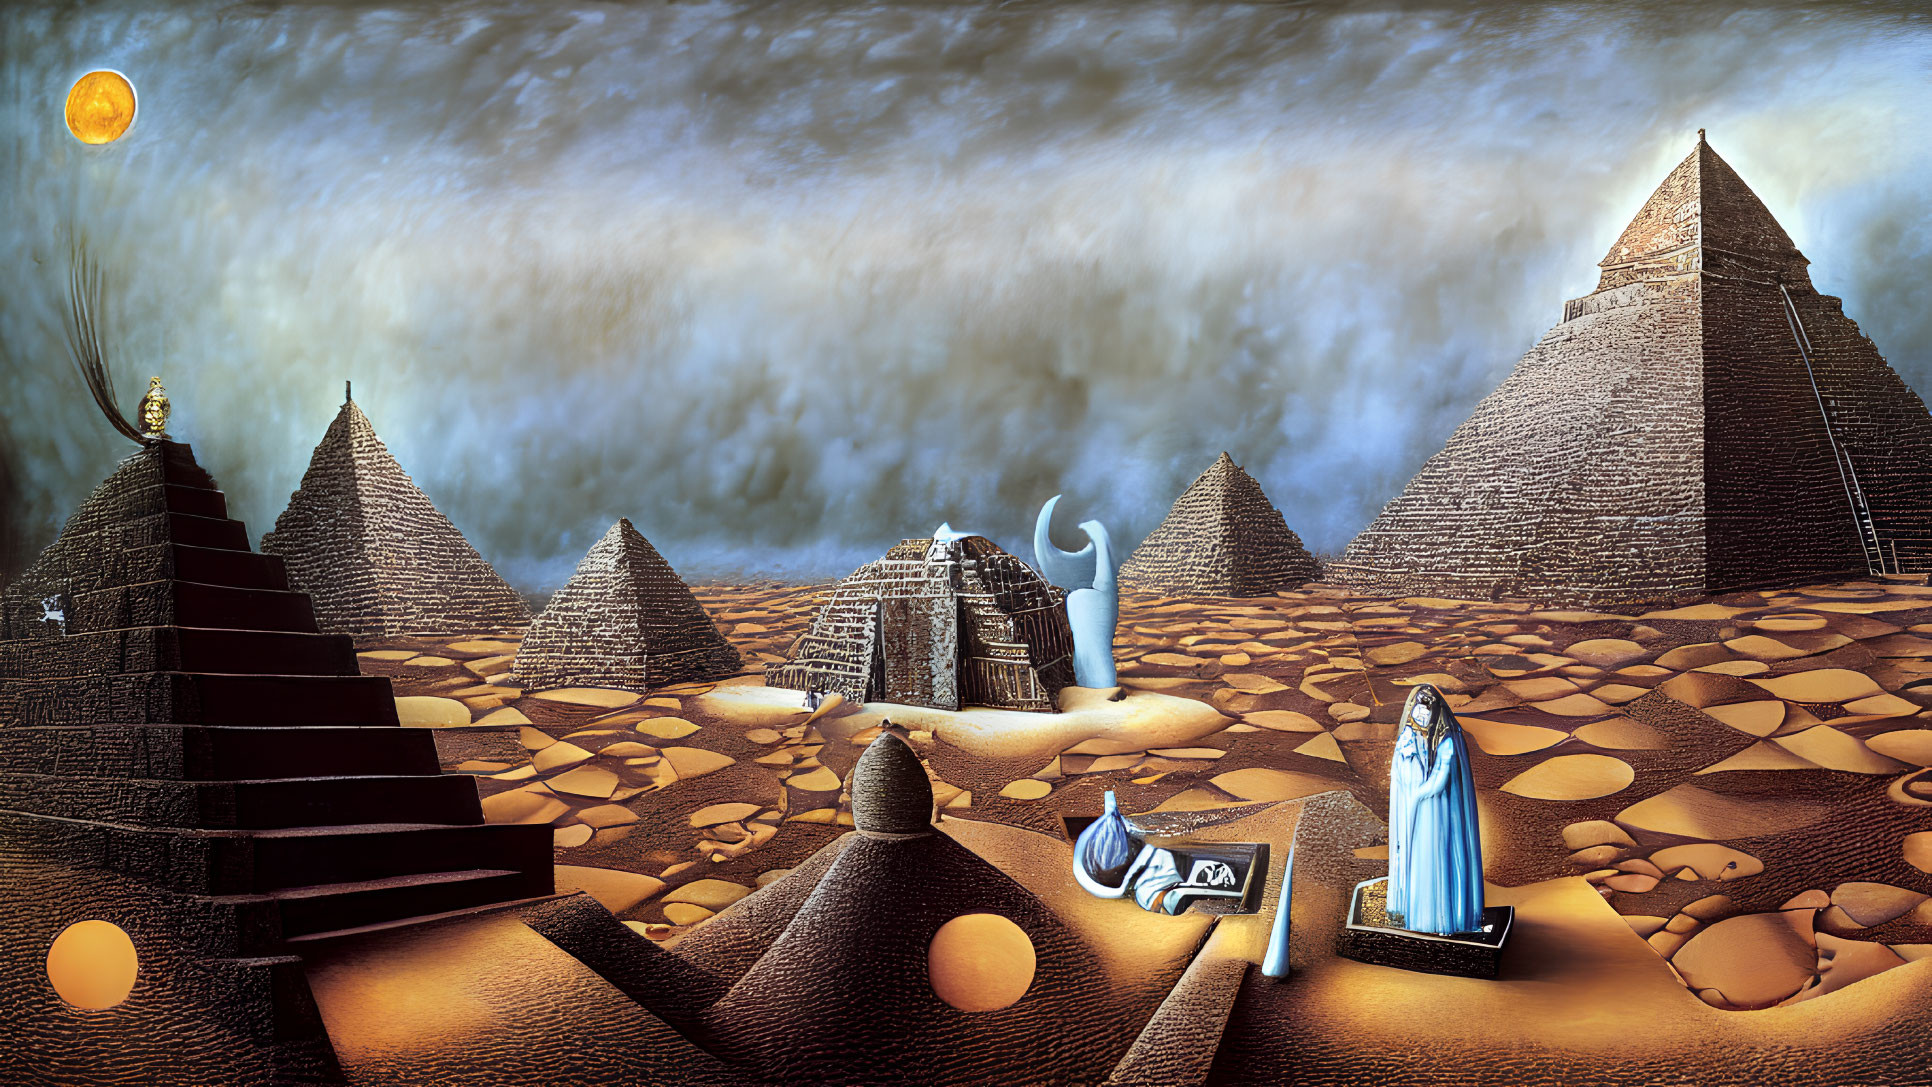 Surreal landscape with pyramids, Egyptian sphinx, and artifacts under an orange sun